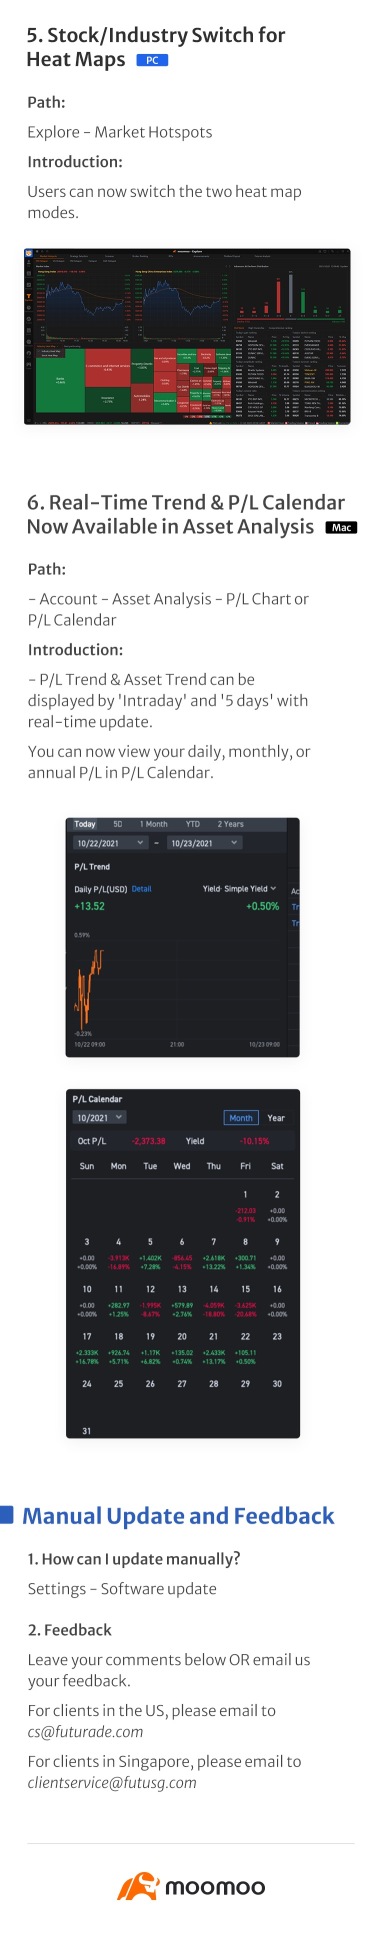 What’s New: US Stock Index Options Viewable Now in Both PC v11.13 & Mac v11.11